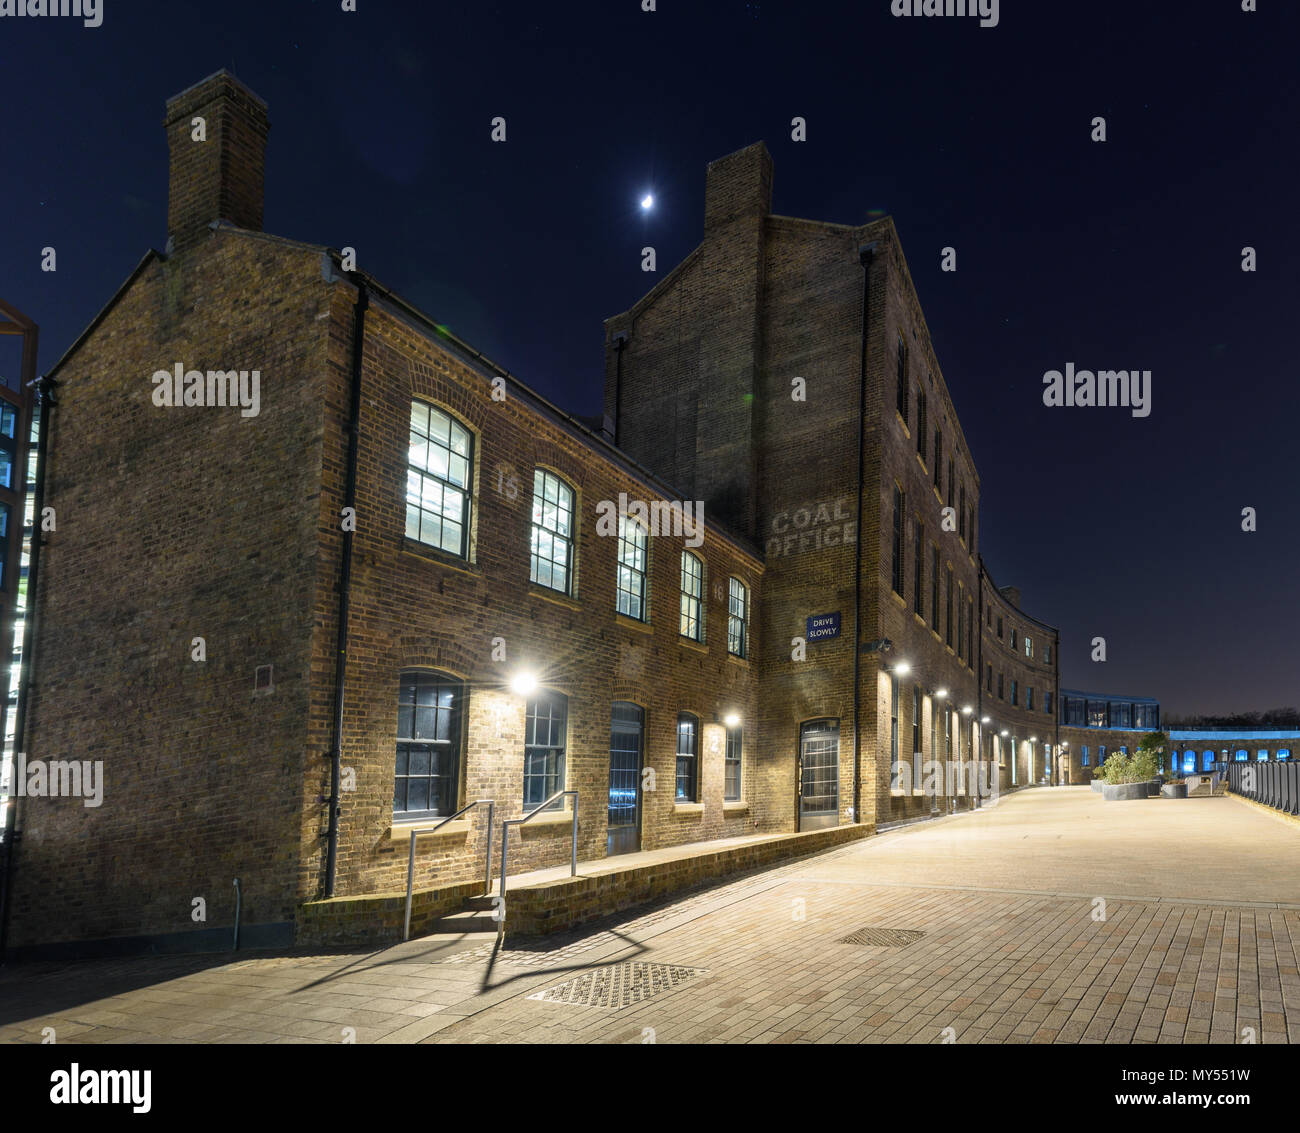 London, England, UK - February 22, 2018: A half moon hangs in the night sky over the Coal Office, part of the King's Cross urban regeneration project  Stock Photo